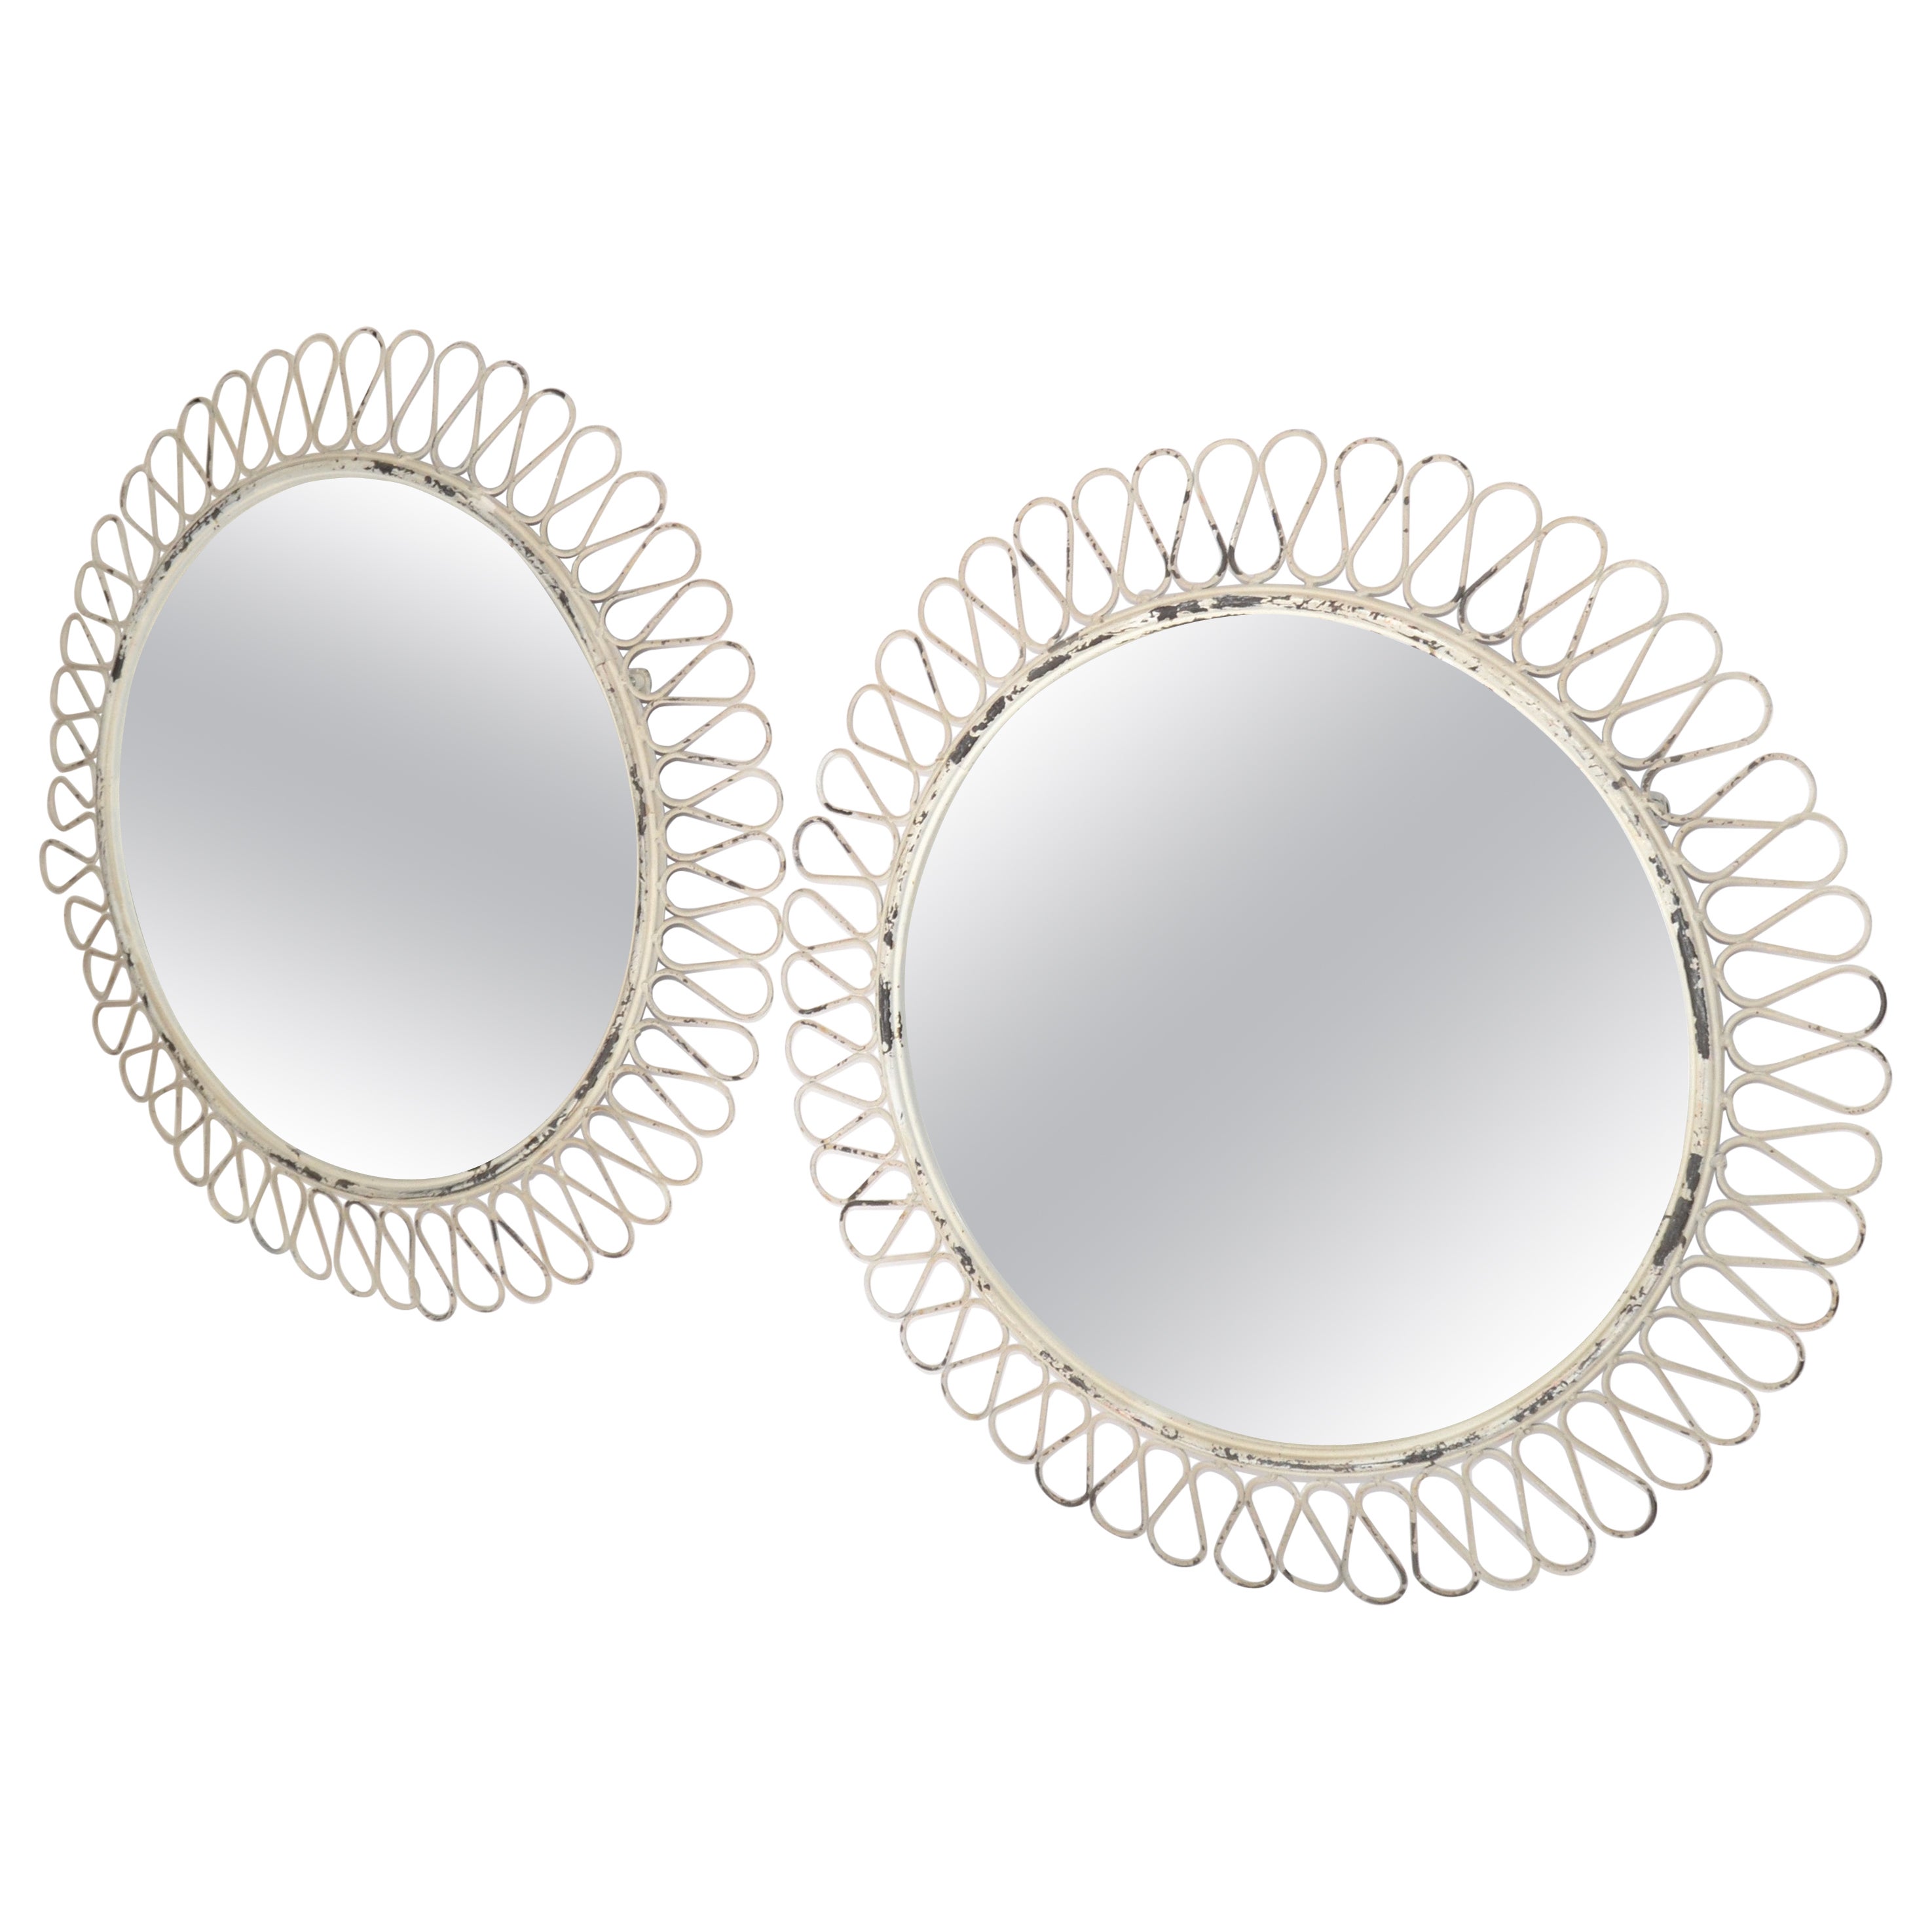 Pair, French Round Wrought Iron Wall Mirror Art Deco Style White Distressed Look